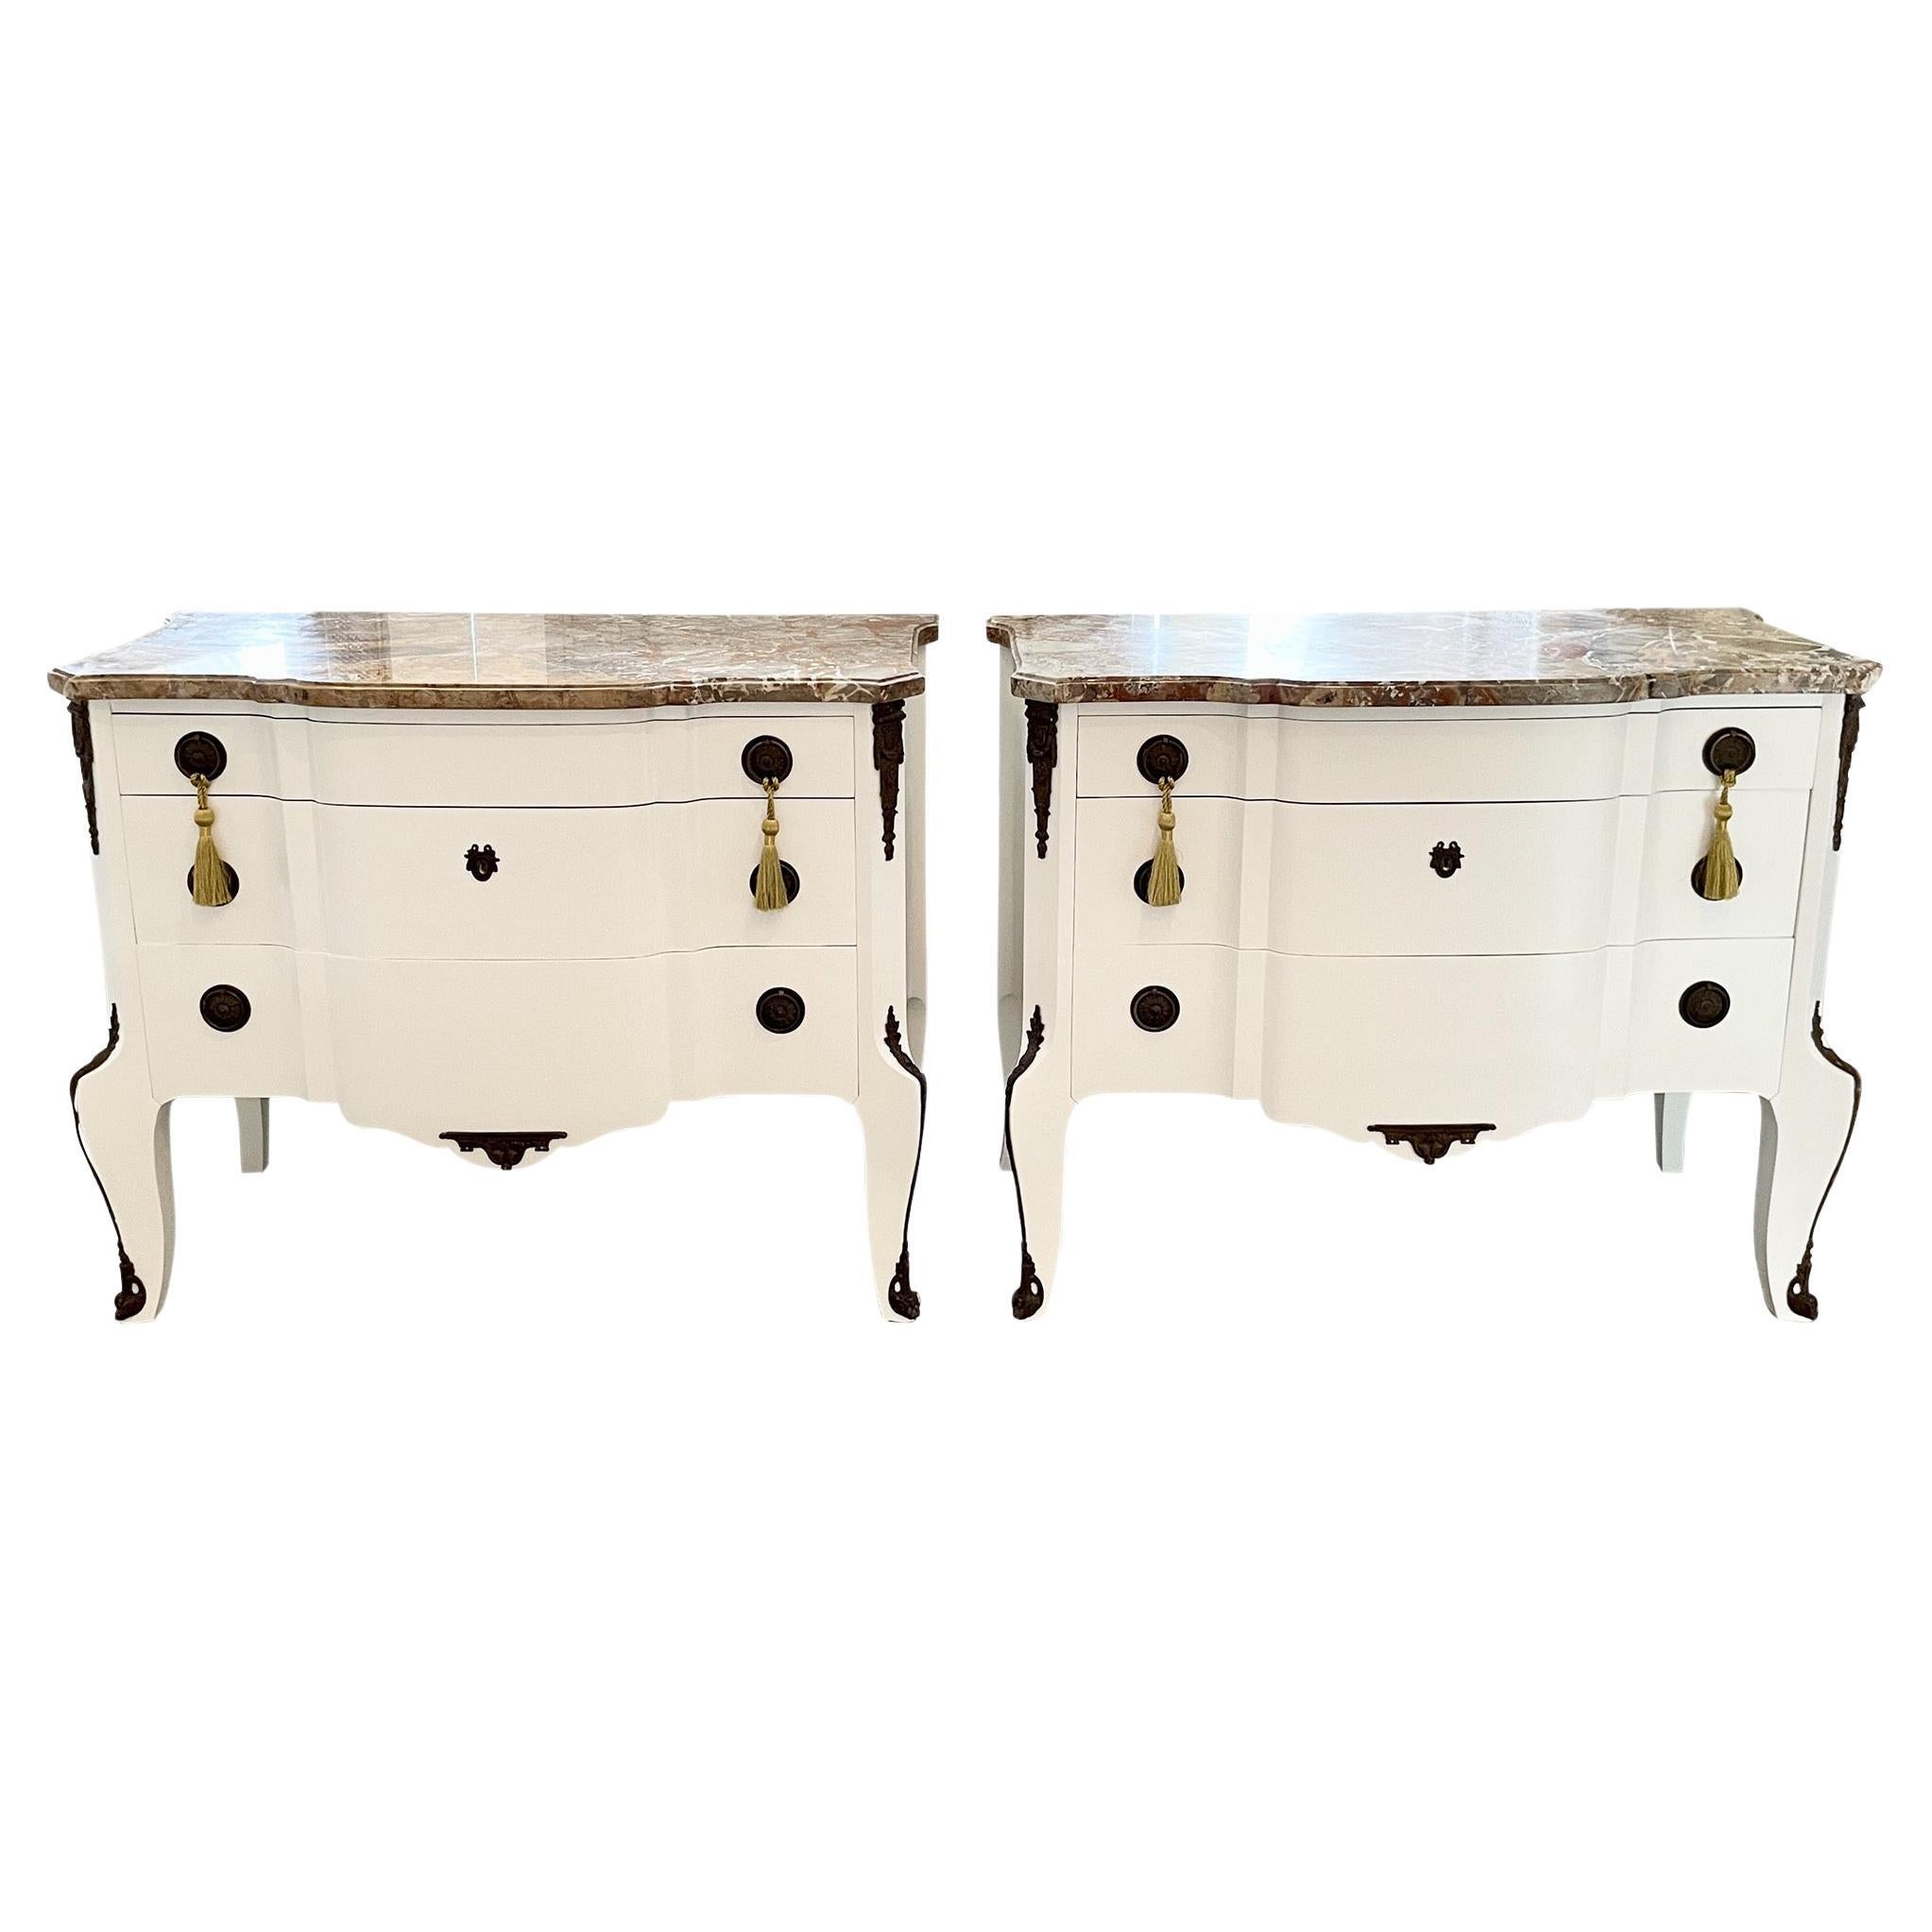 French Transition Commodes With Original Marble Tops - a Pair